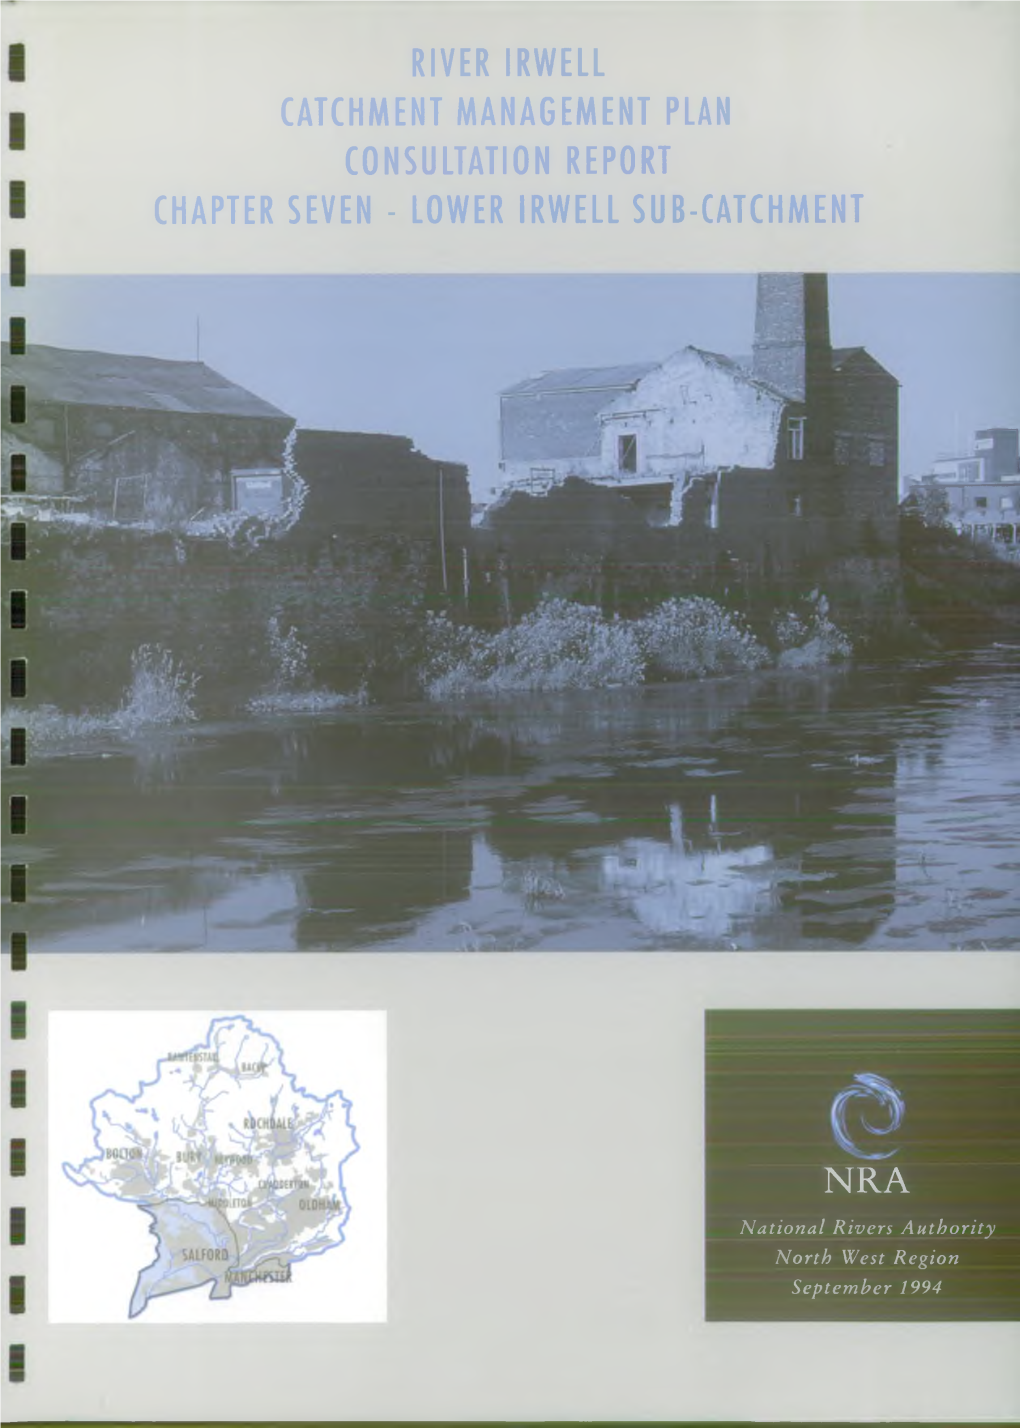 River Irwell Catchment Management Plan Consultation Report Chapter Seven - Lower Irwell Sub-Catchment